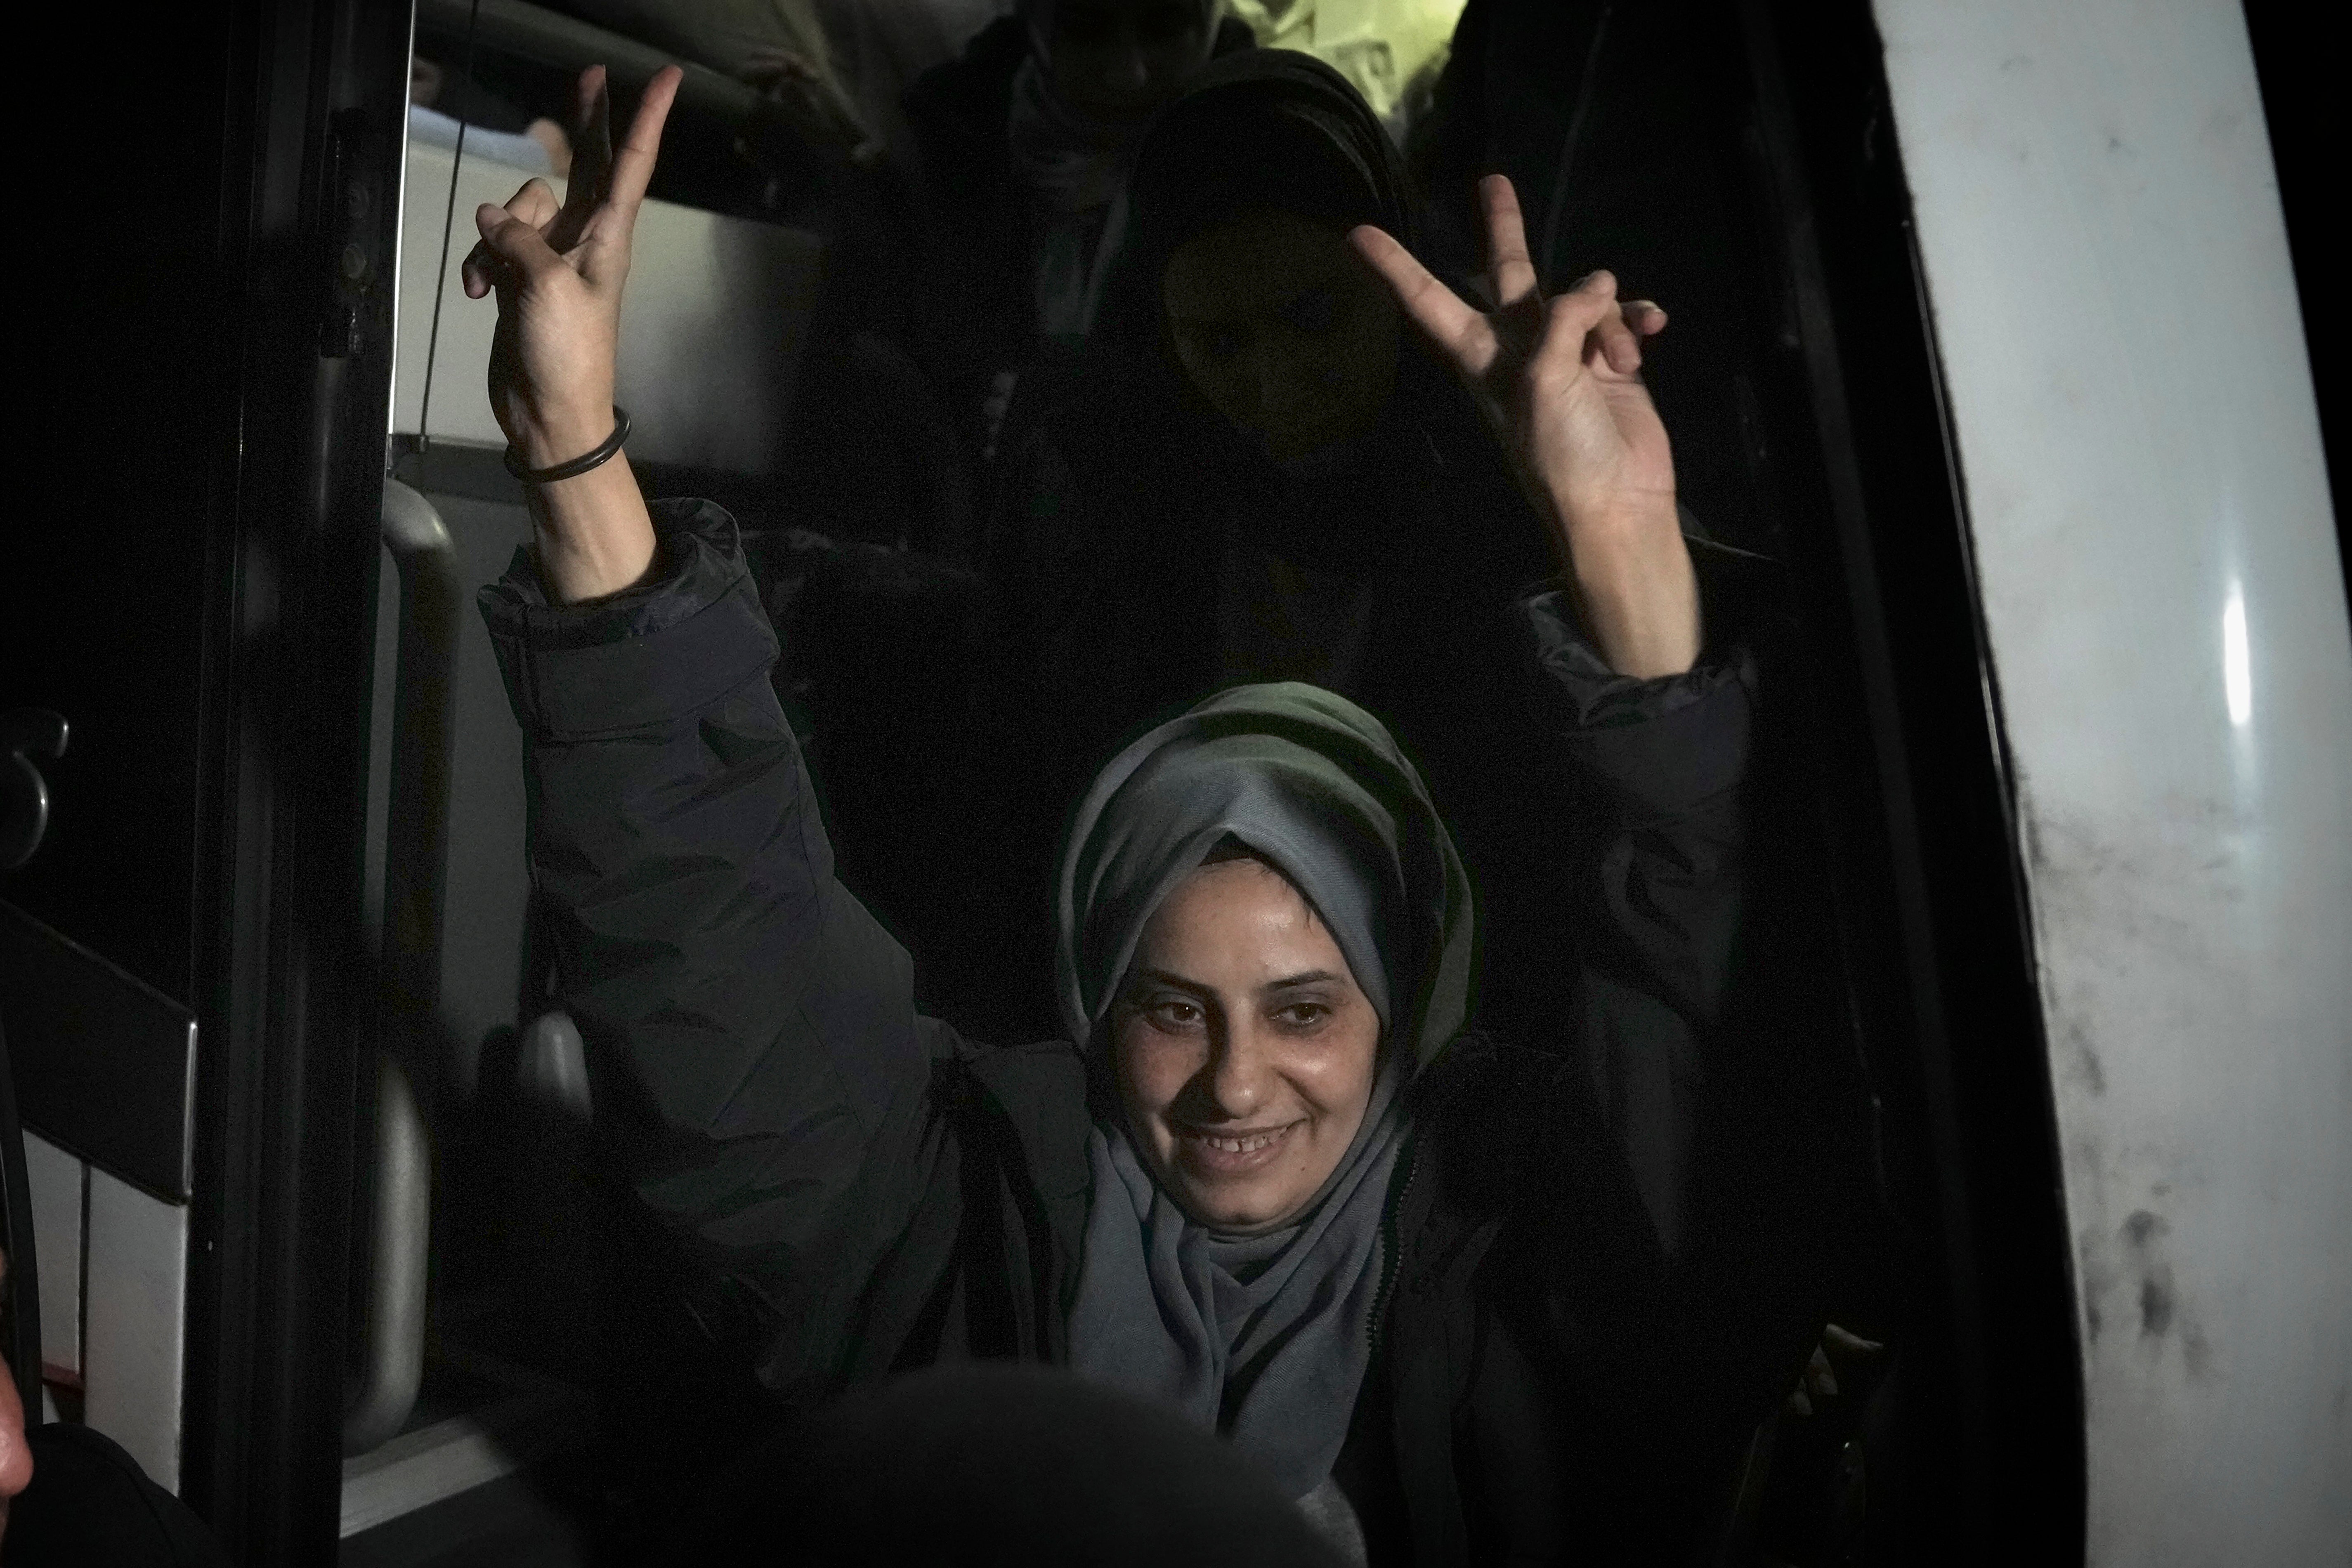 Palestinian Lamis Abu Arkoub is greeted after she was released from prison by Israel